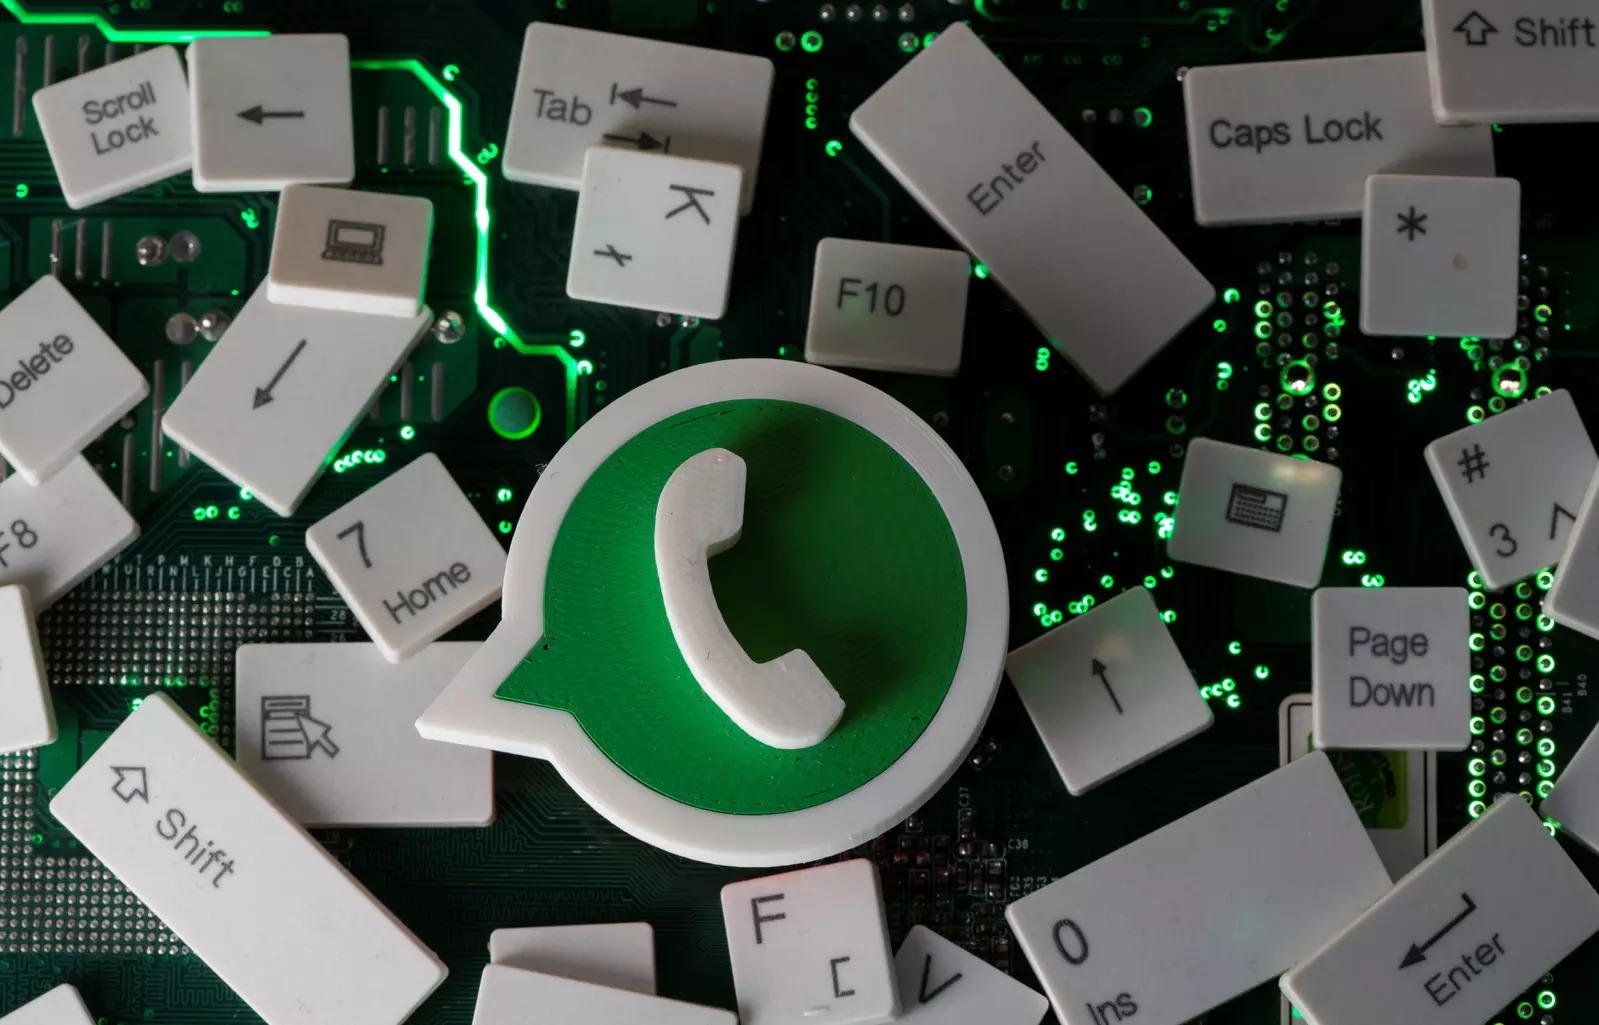 WhatsApp new feature for users to send large files in chats